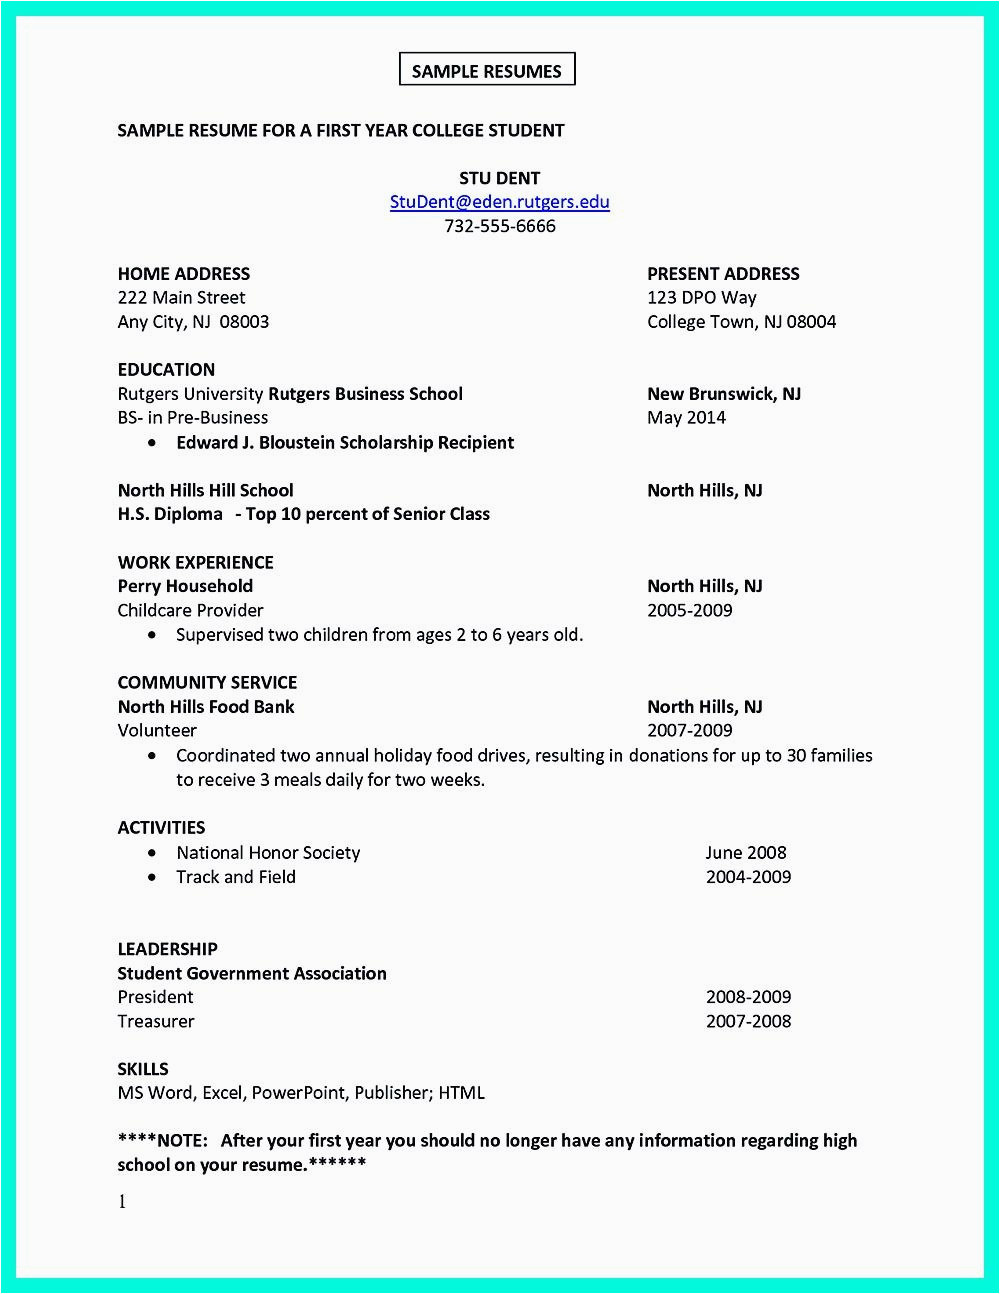 Sample Resume Objective for soon to Be College Graduate Current College Student Resume is Designed for Fresh Graduate Student